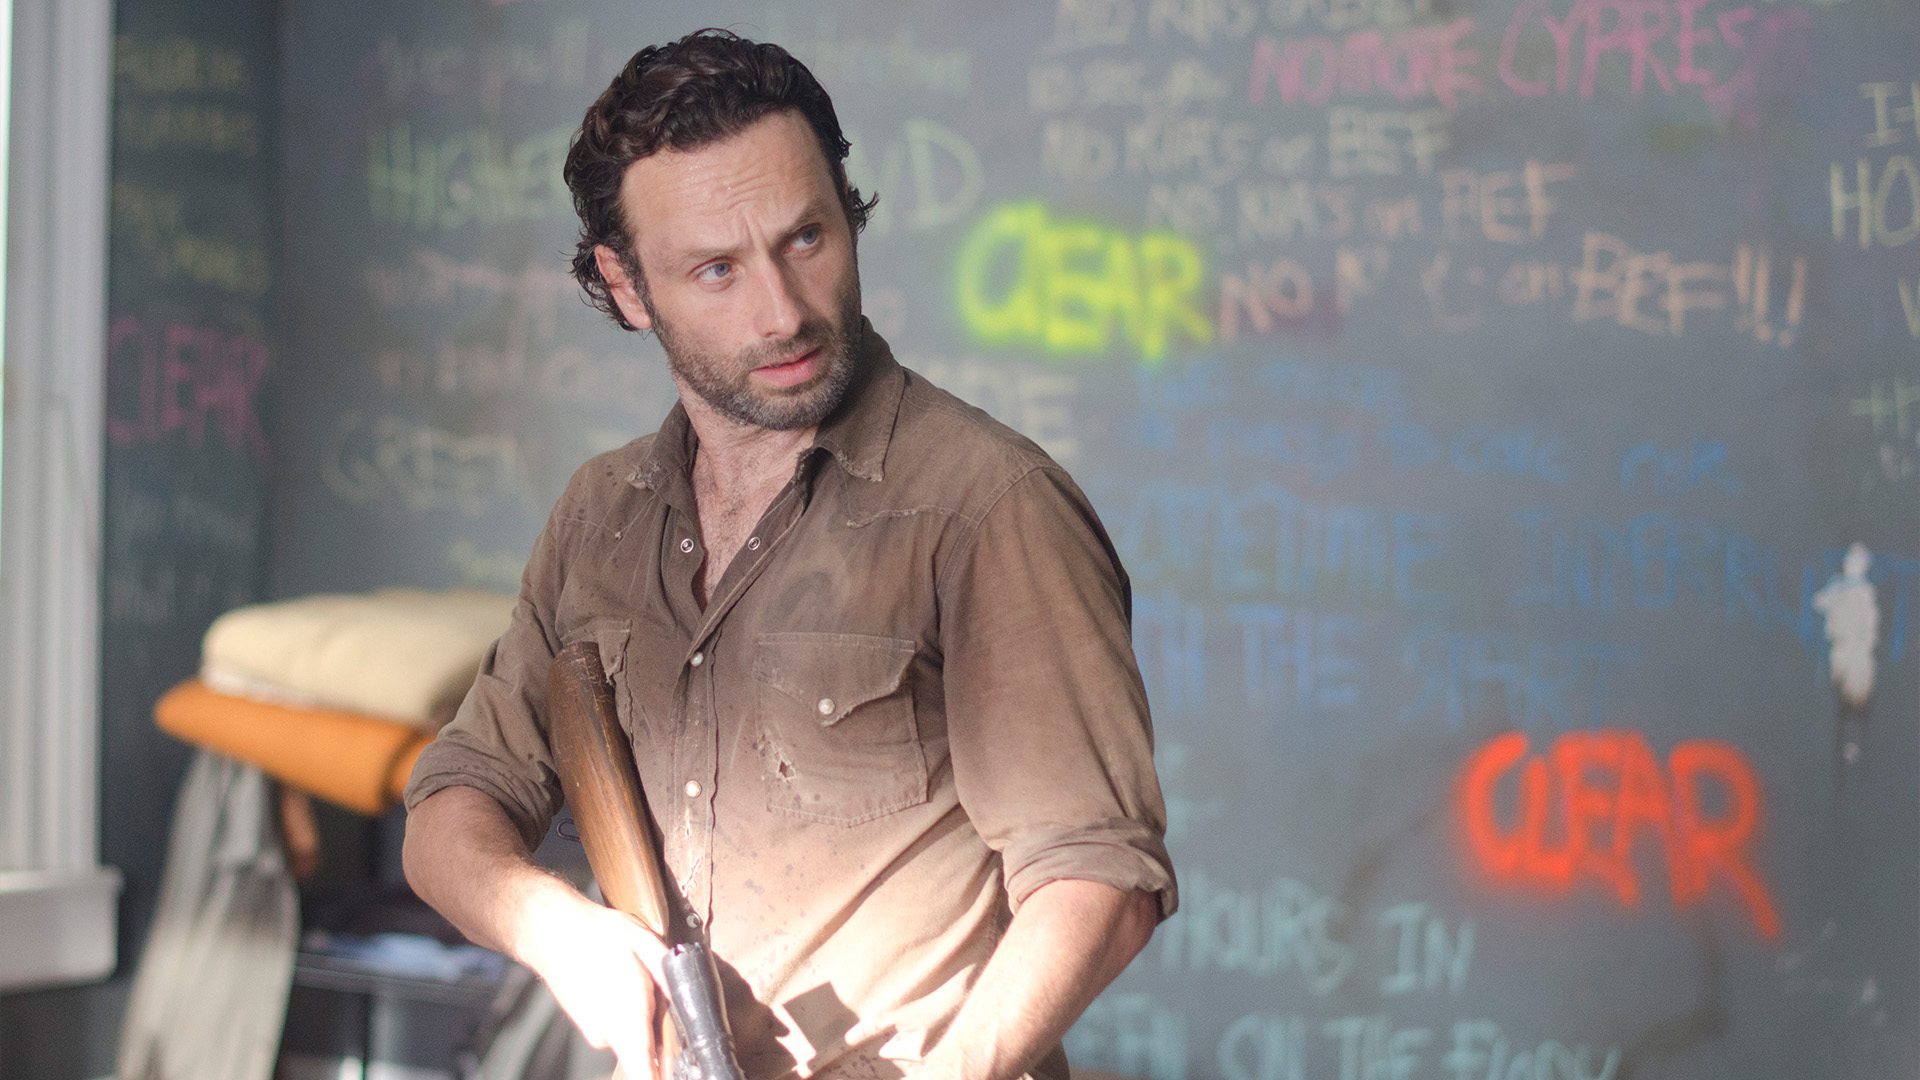 Clear: Best of Rick Edition, Relive Rick's best moments in this iconic episode from Season 3., Season 1066712, Episode 4